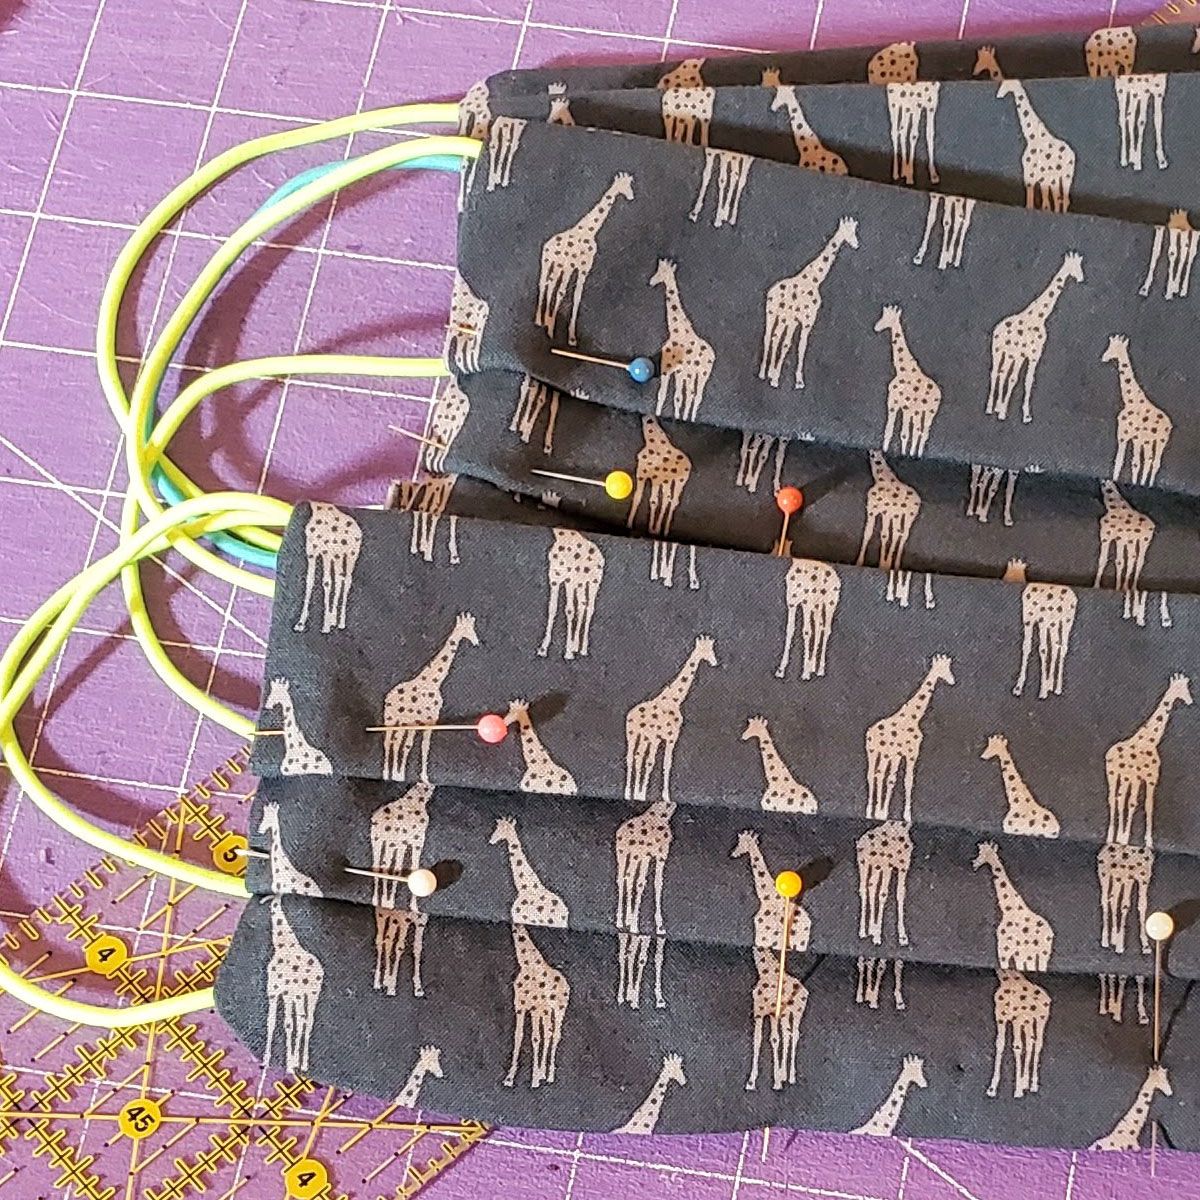 Batch sewing example, close up